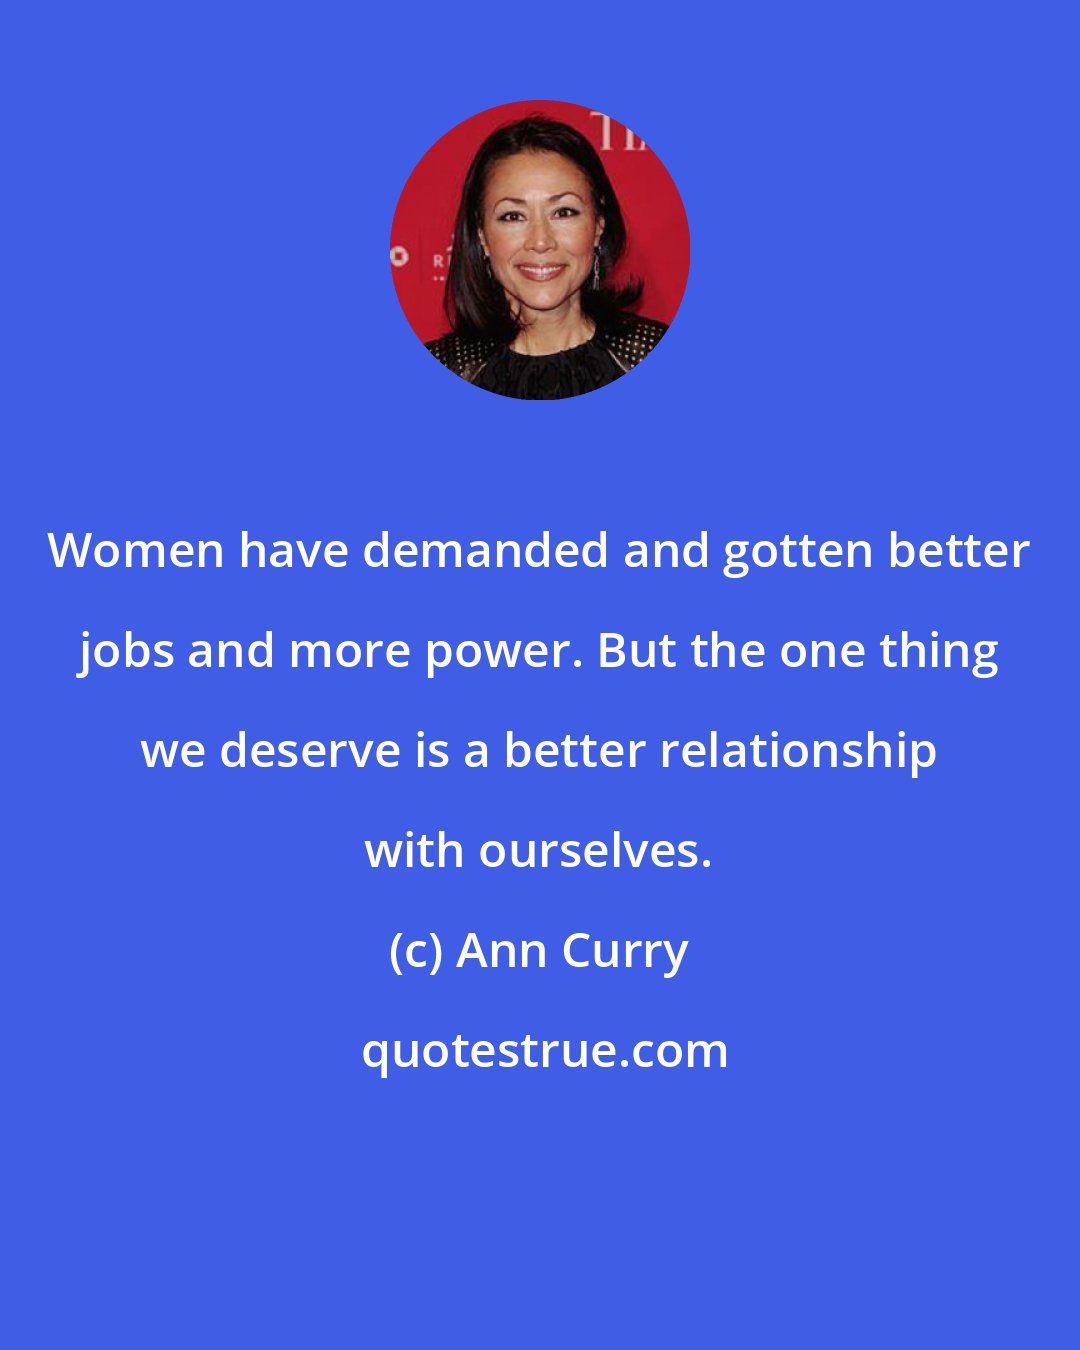 Ann Curry: Women have demanded and gotten better jobs and more power. But the one thing we deserve is a better relationship with ourselves.